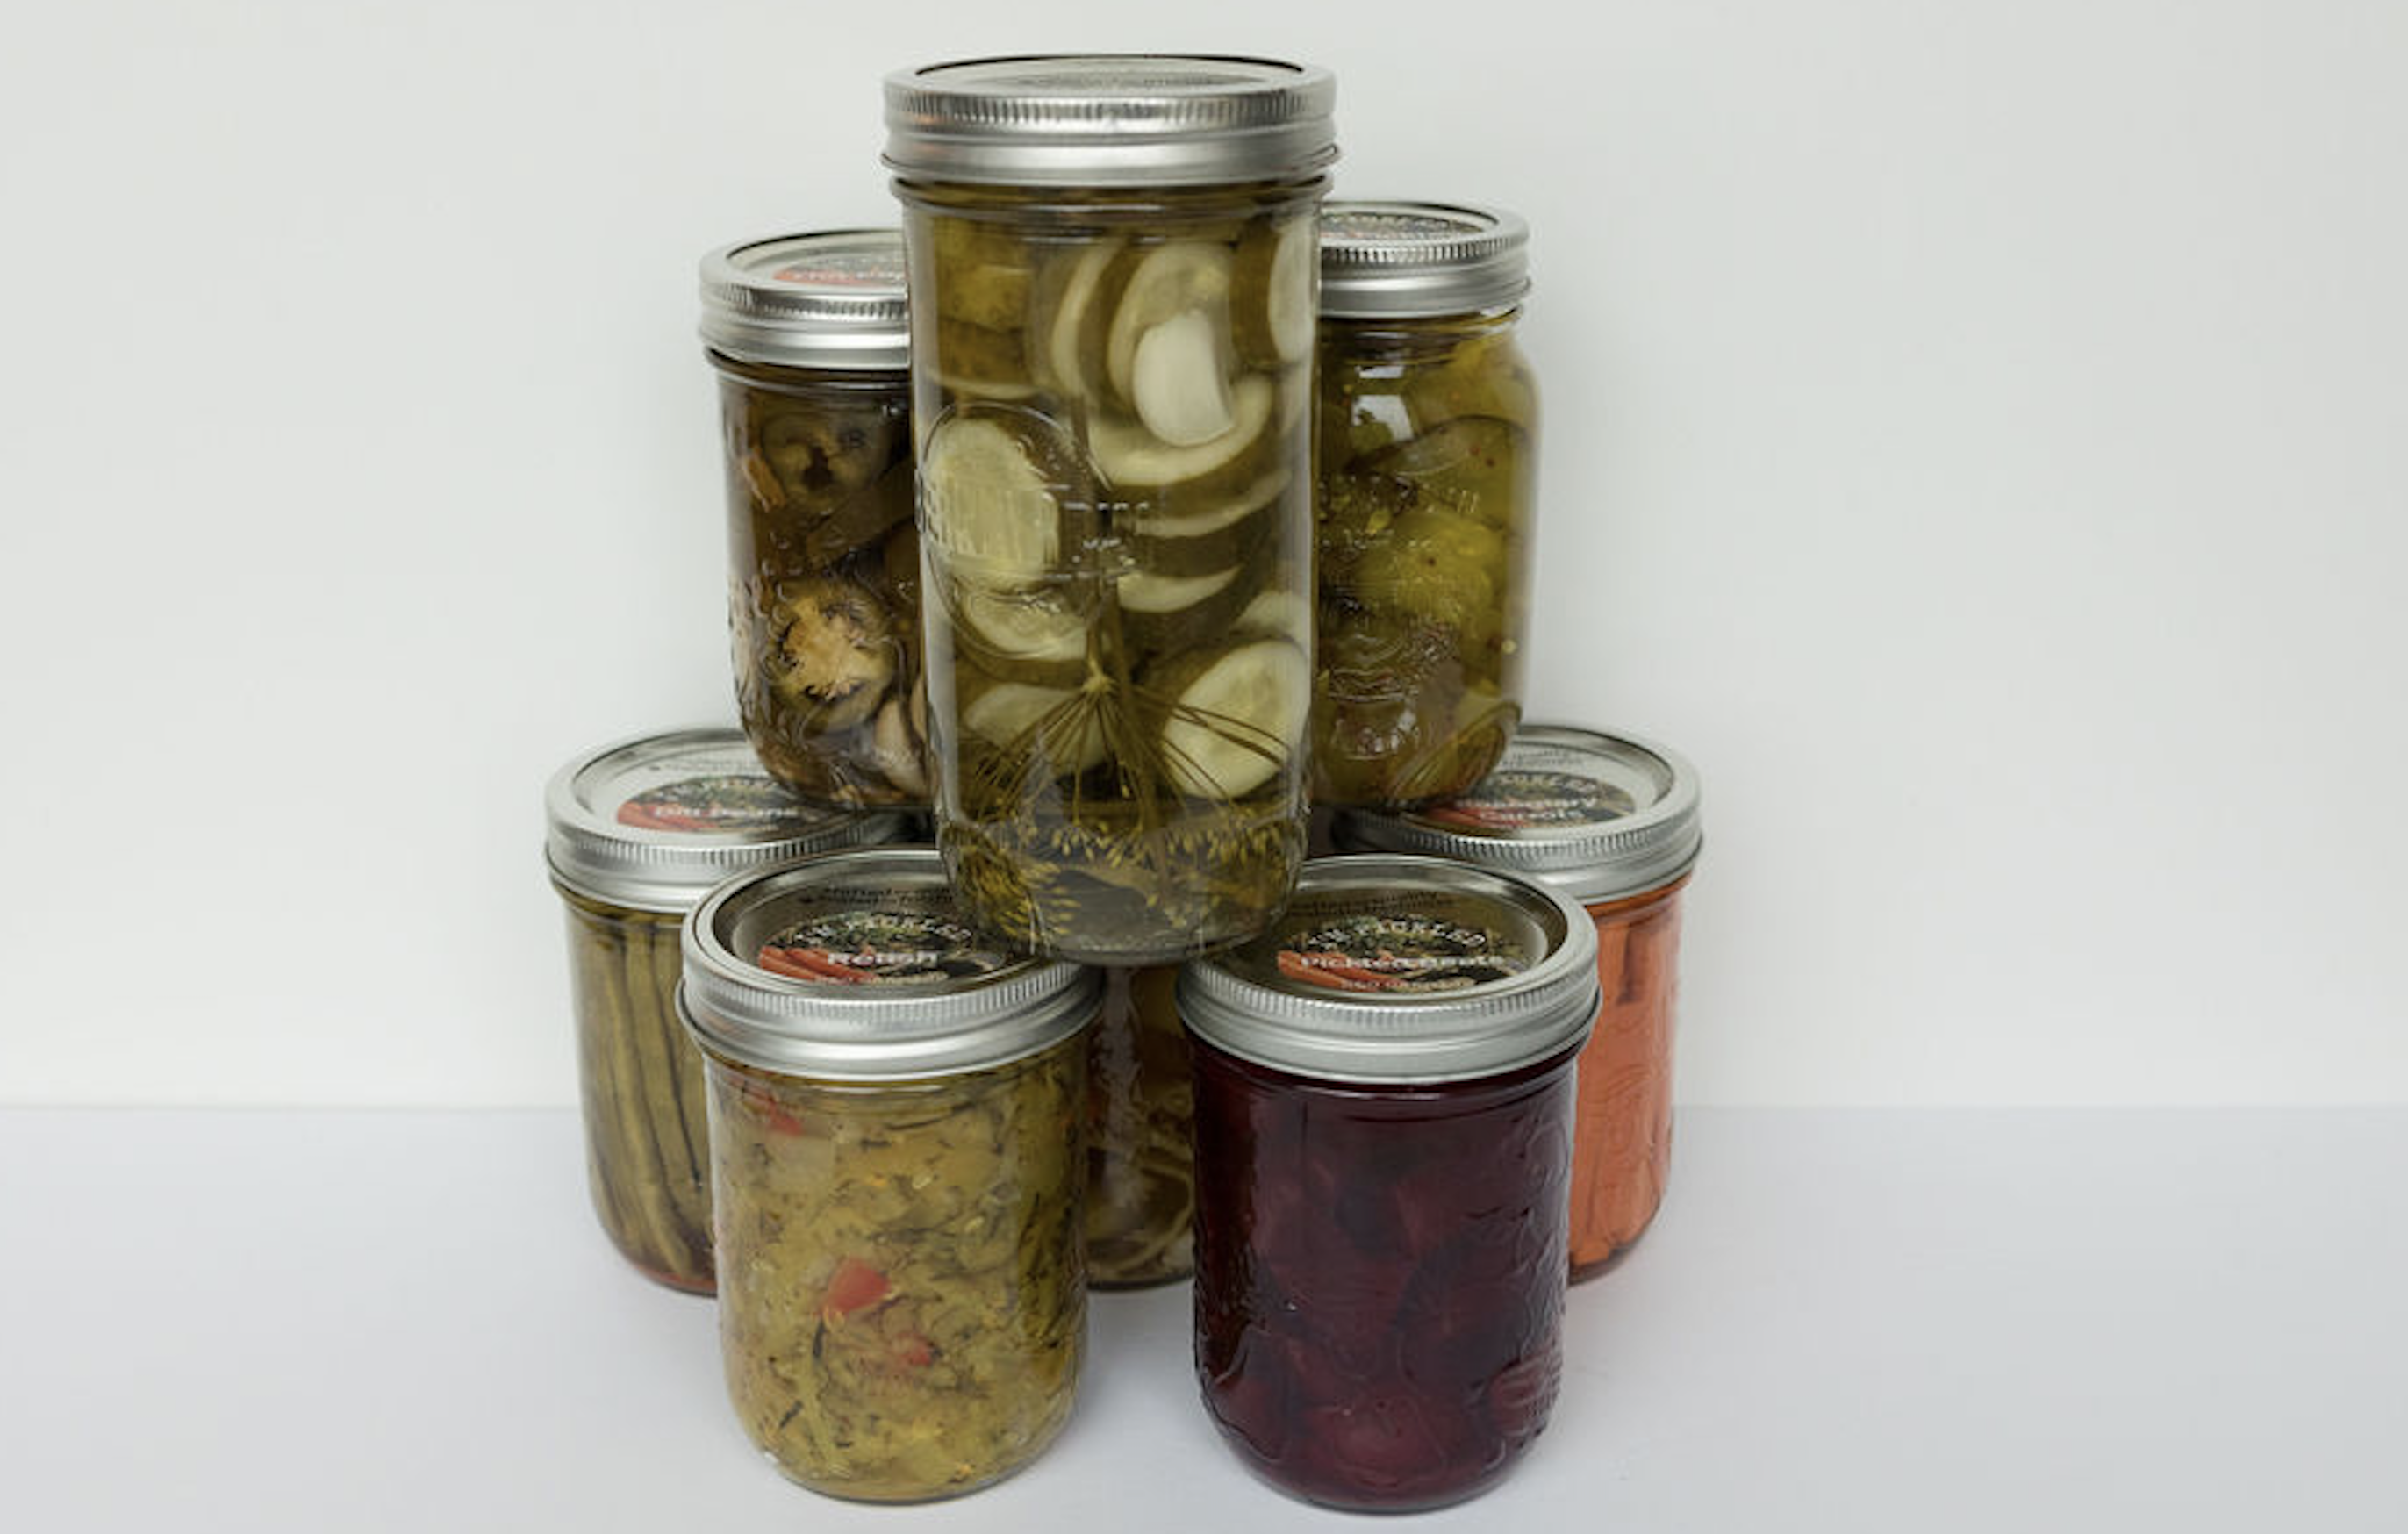 IM PICKLED best pickles in mission bc handmade pickles crafted locally fraser valley british columbia canada 5